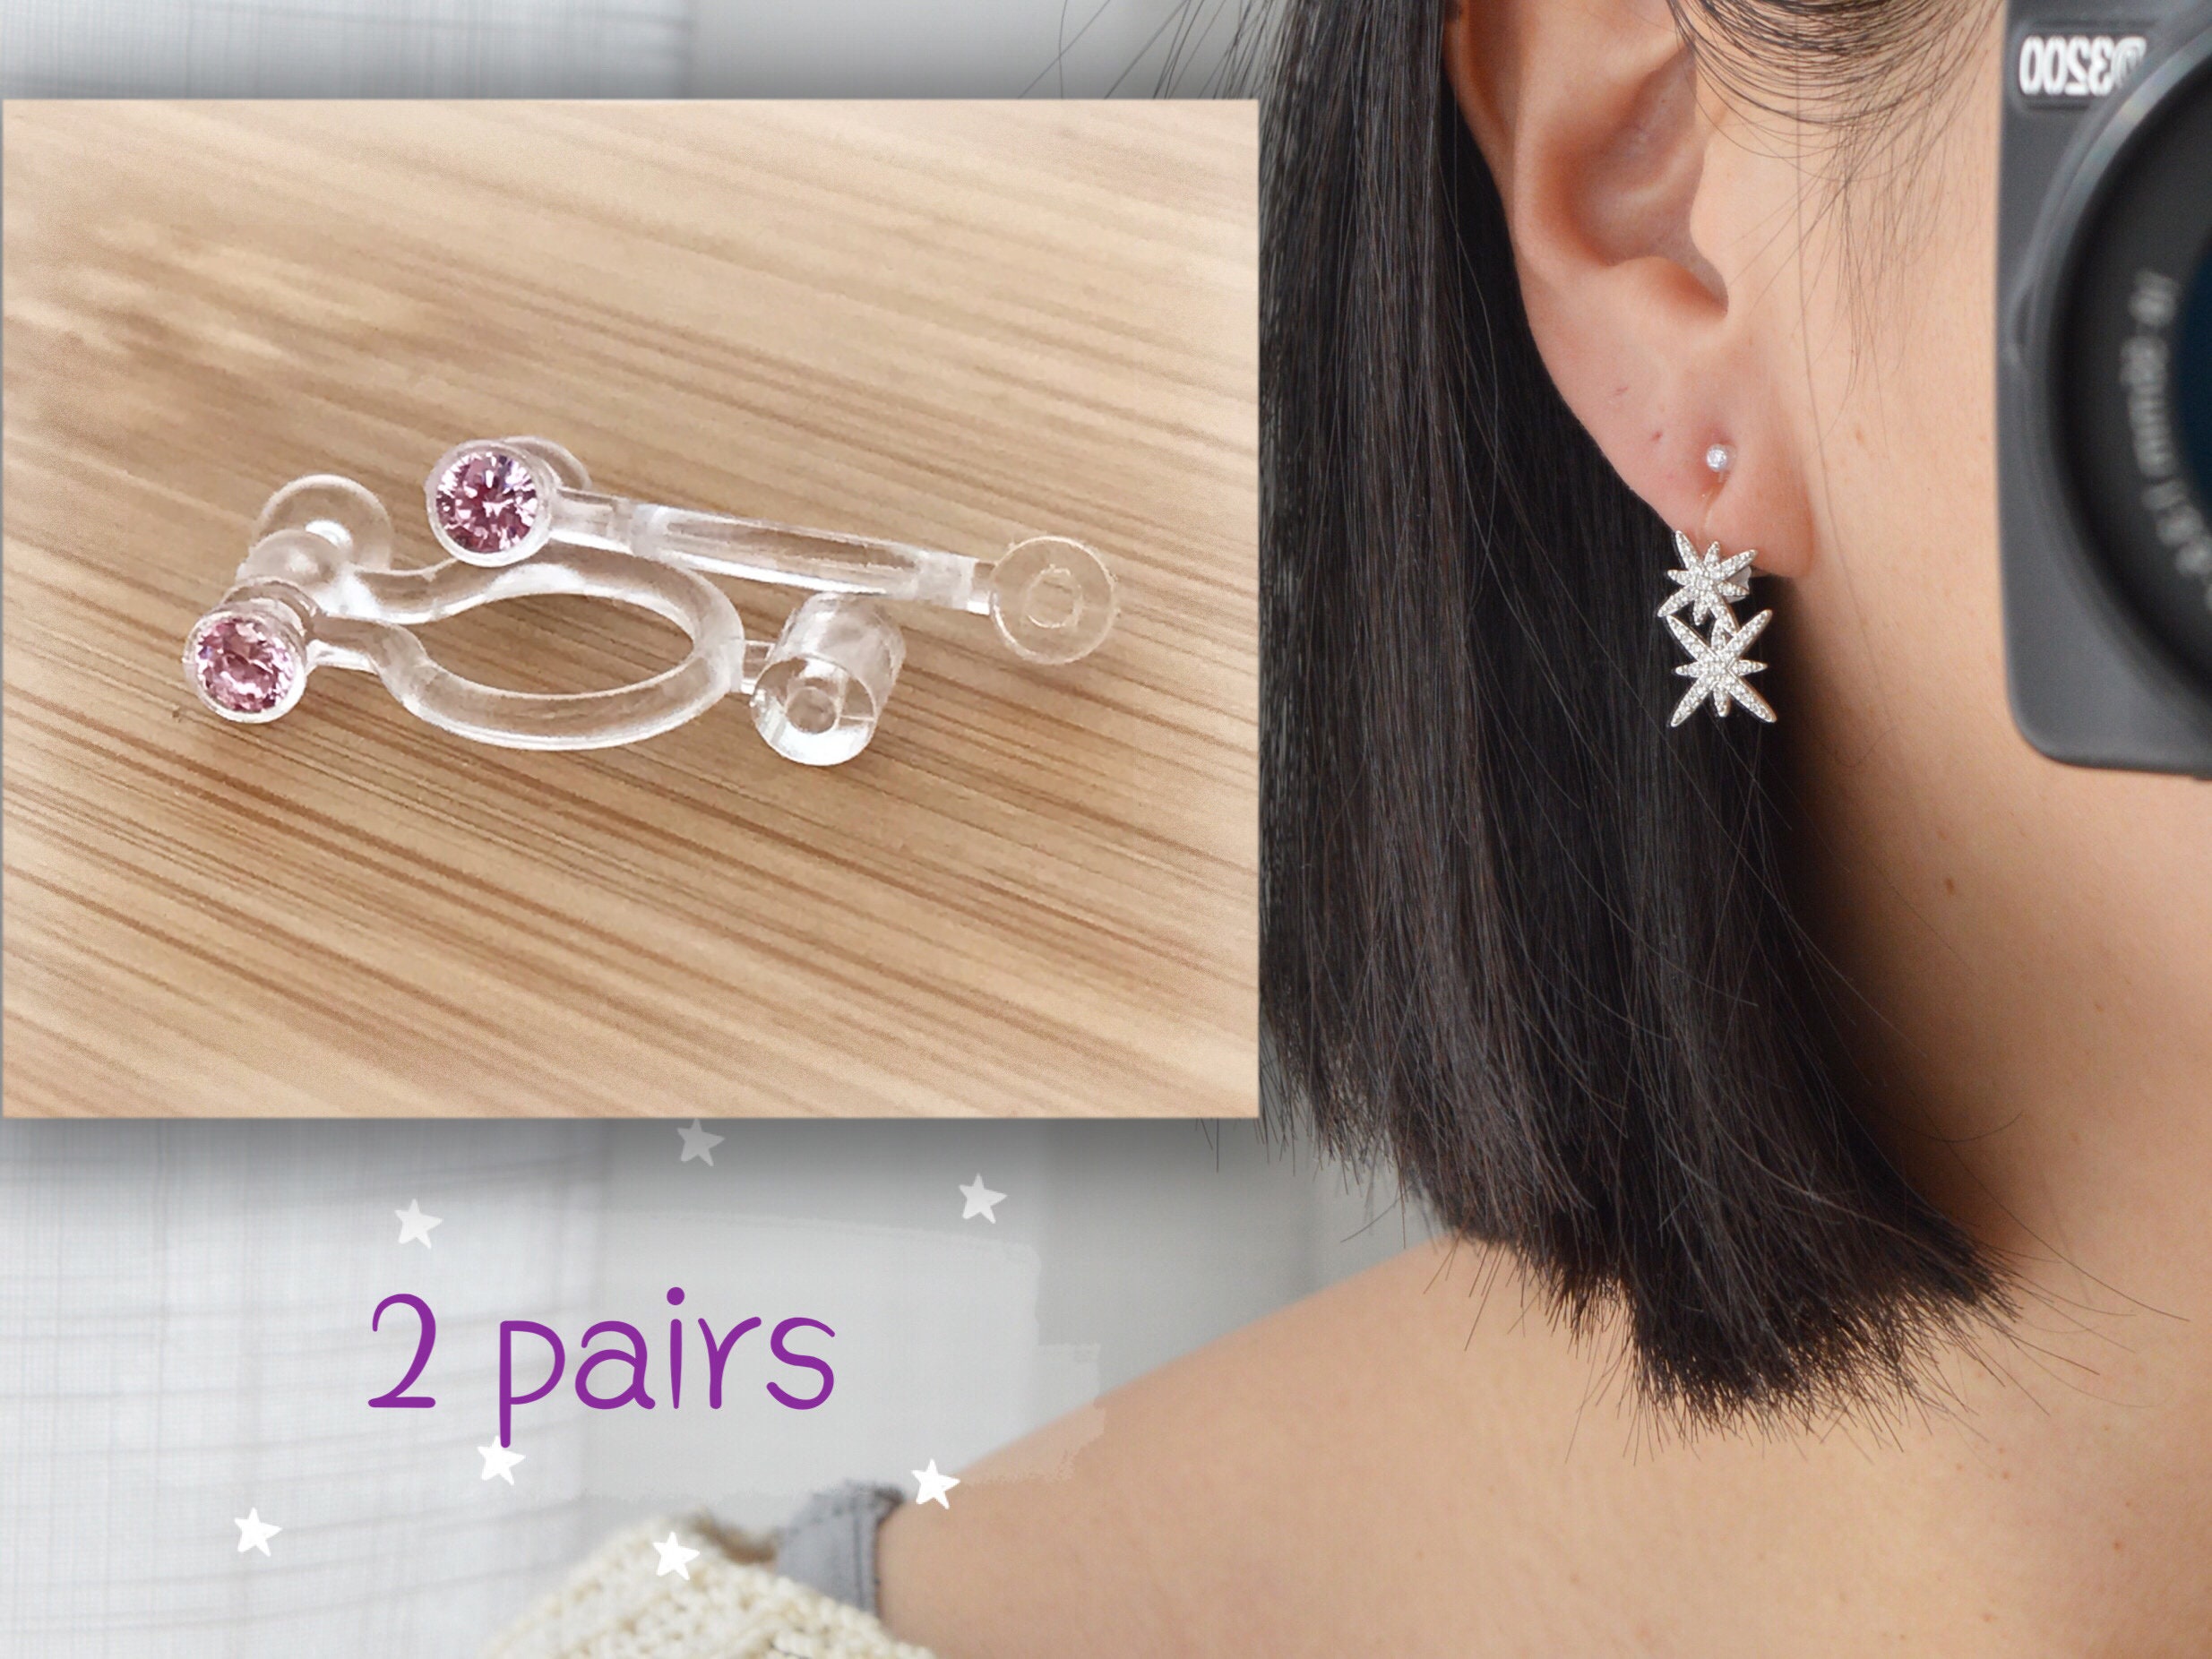 Transparent Convertible Earring Converters Cushions With Backs And Pierced  Ear Clip Pads From Chicmemo, $10.96